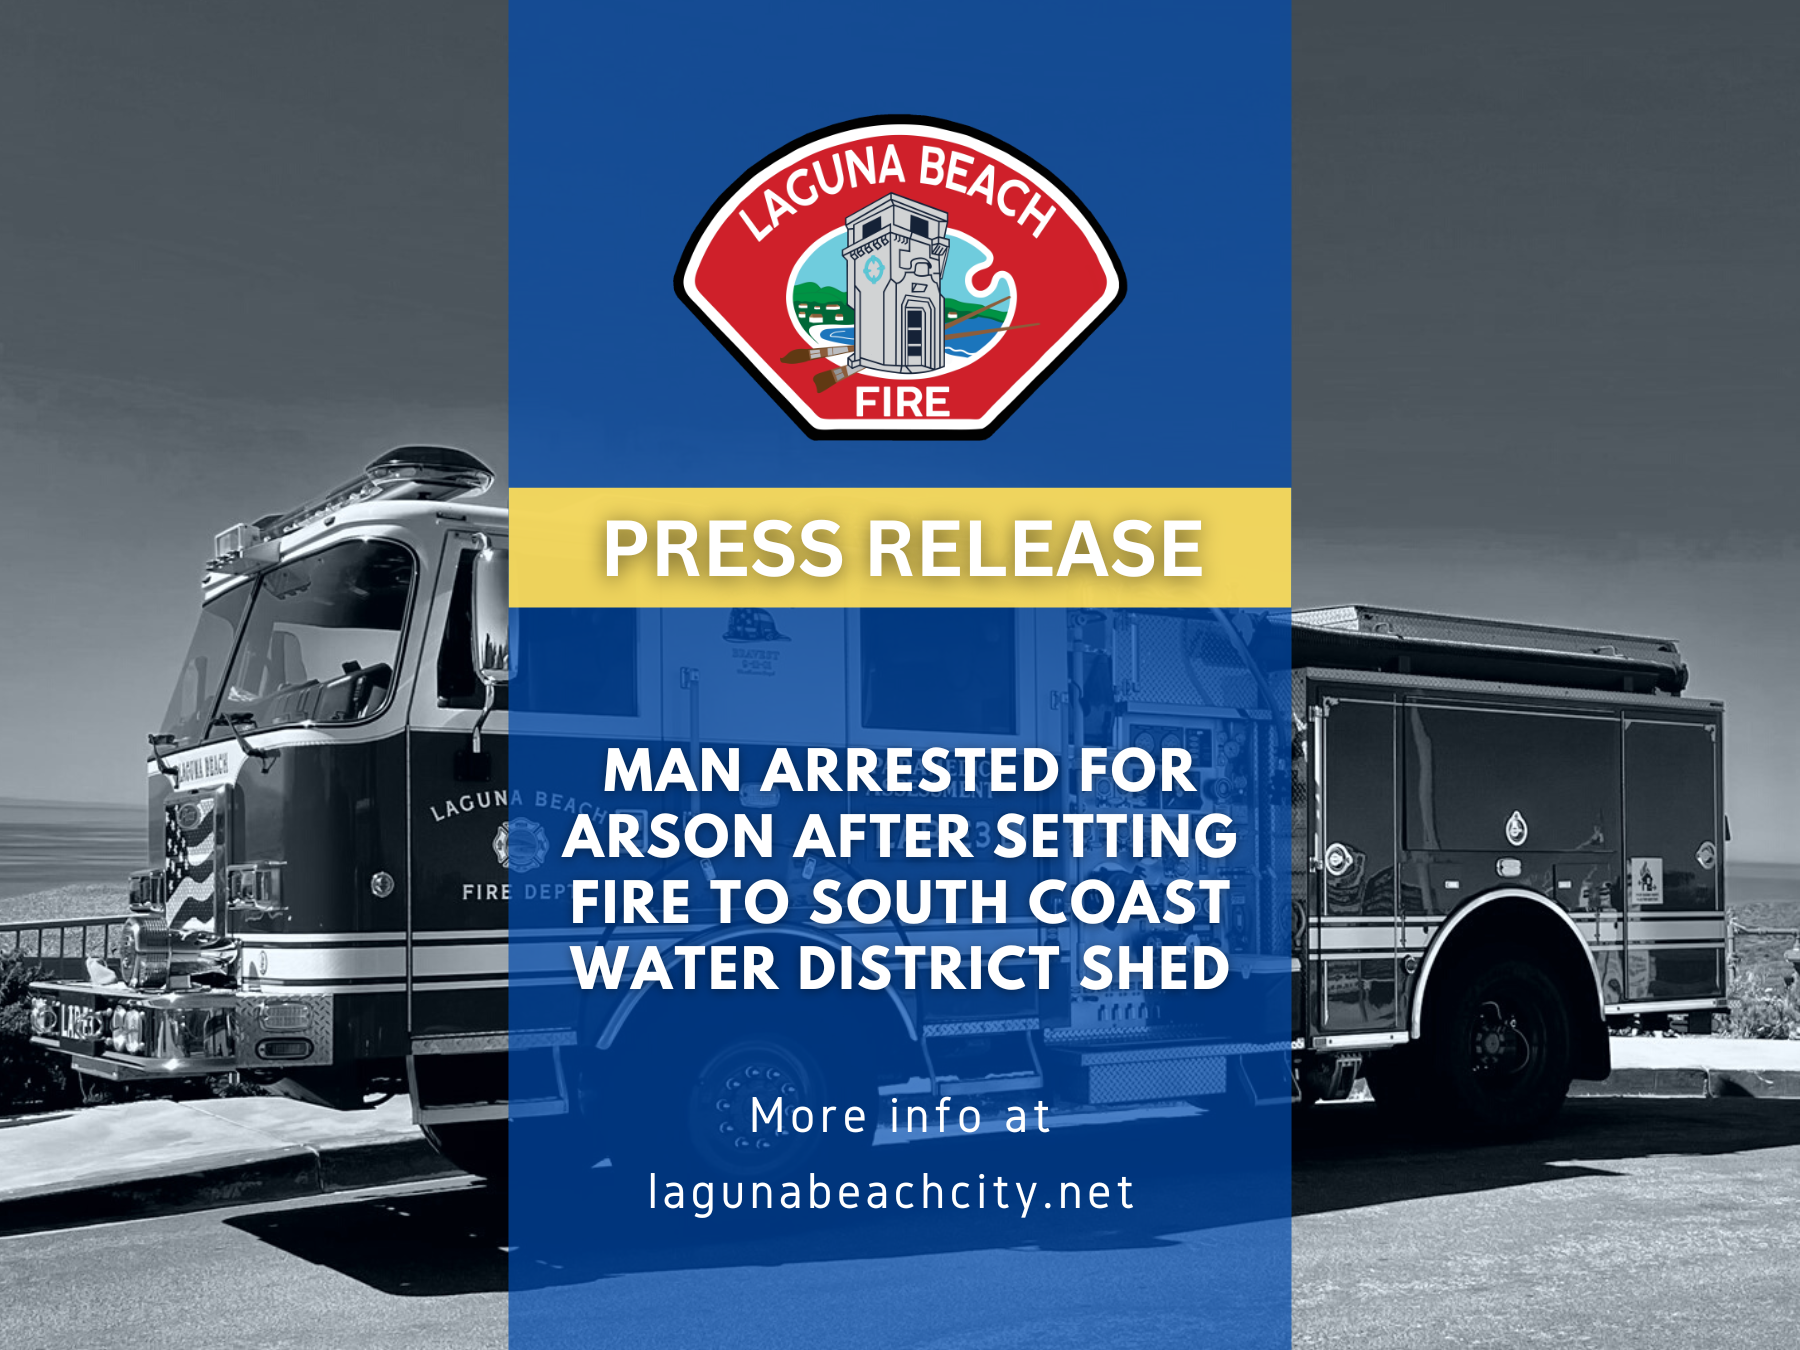 Press Release - Man Arrested for Arson